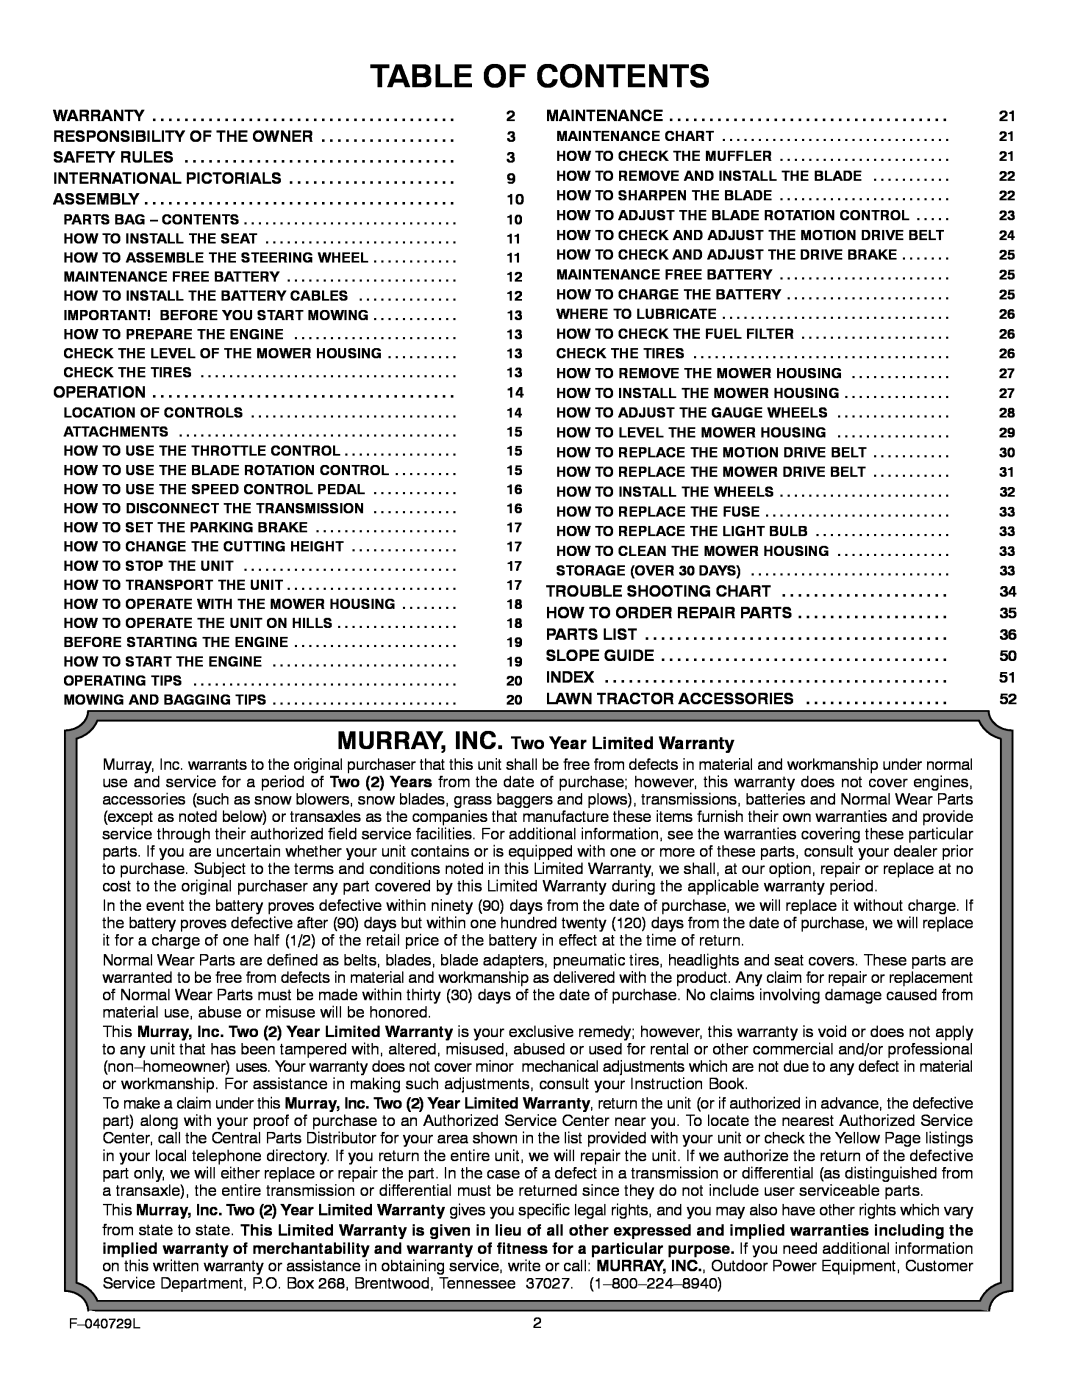 Murray 425620x92A manual Table Of Contents, MURRAY, INC. Two Year Limited Warranty 